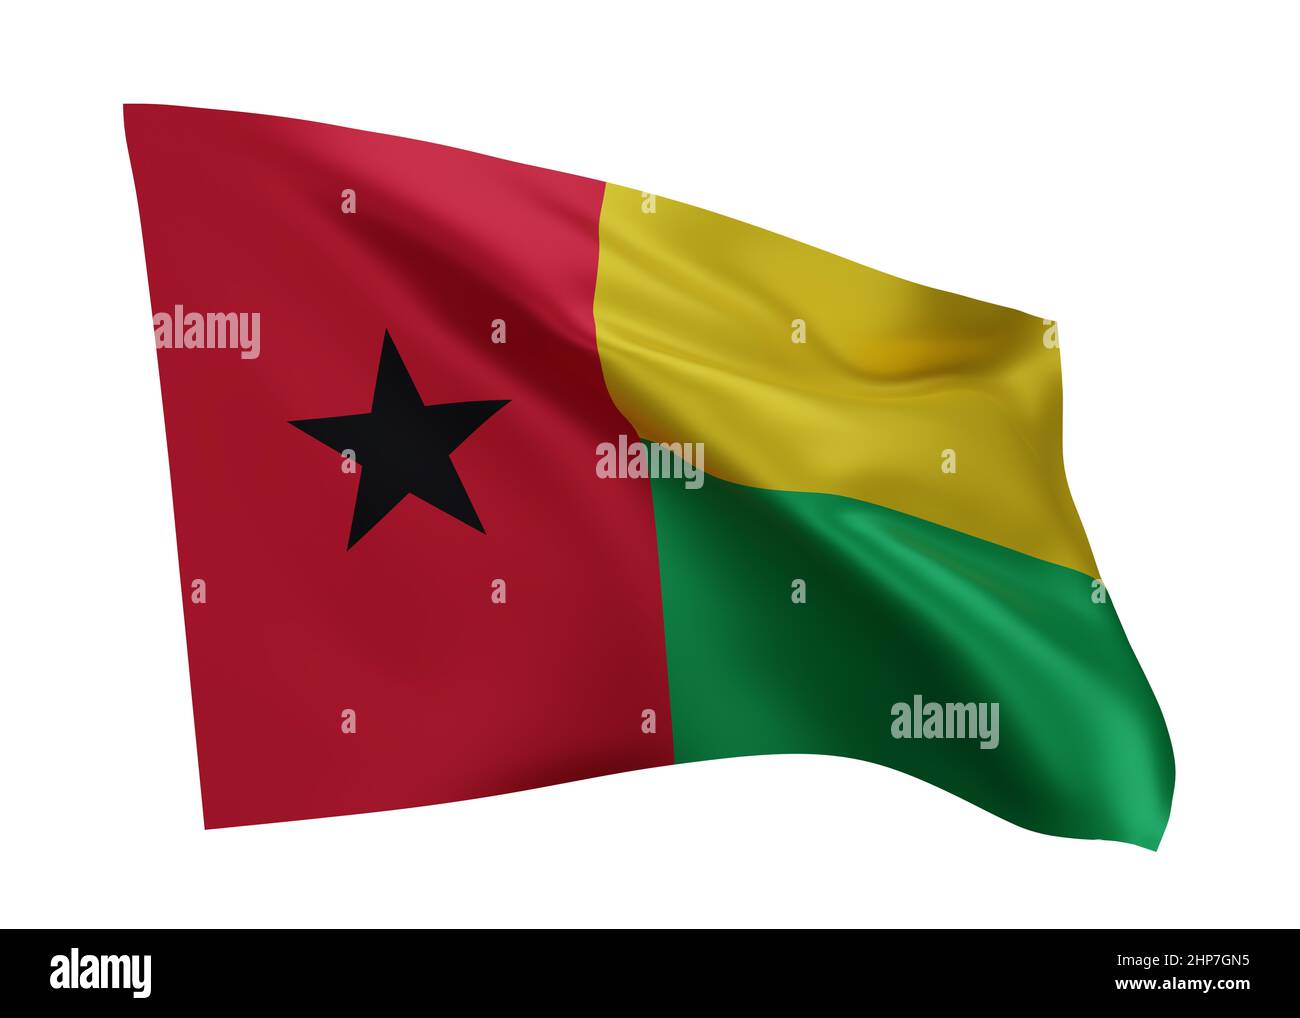 3d illustration flag of Guinea Bissau . Guinea Bissau high resolution flag isolated against white background. 3d rendering Stock Photo